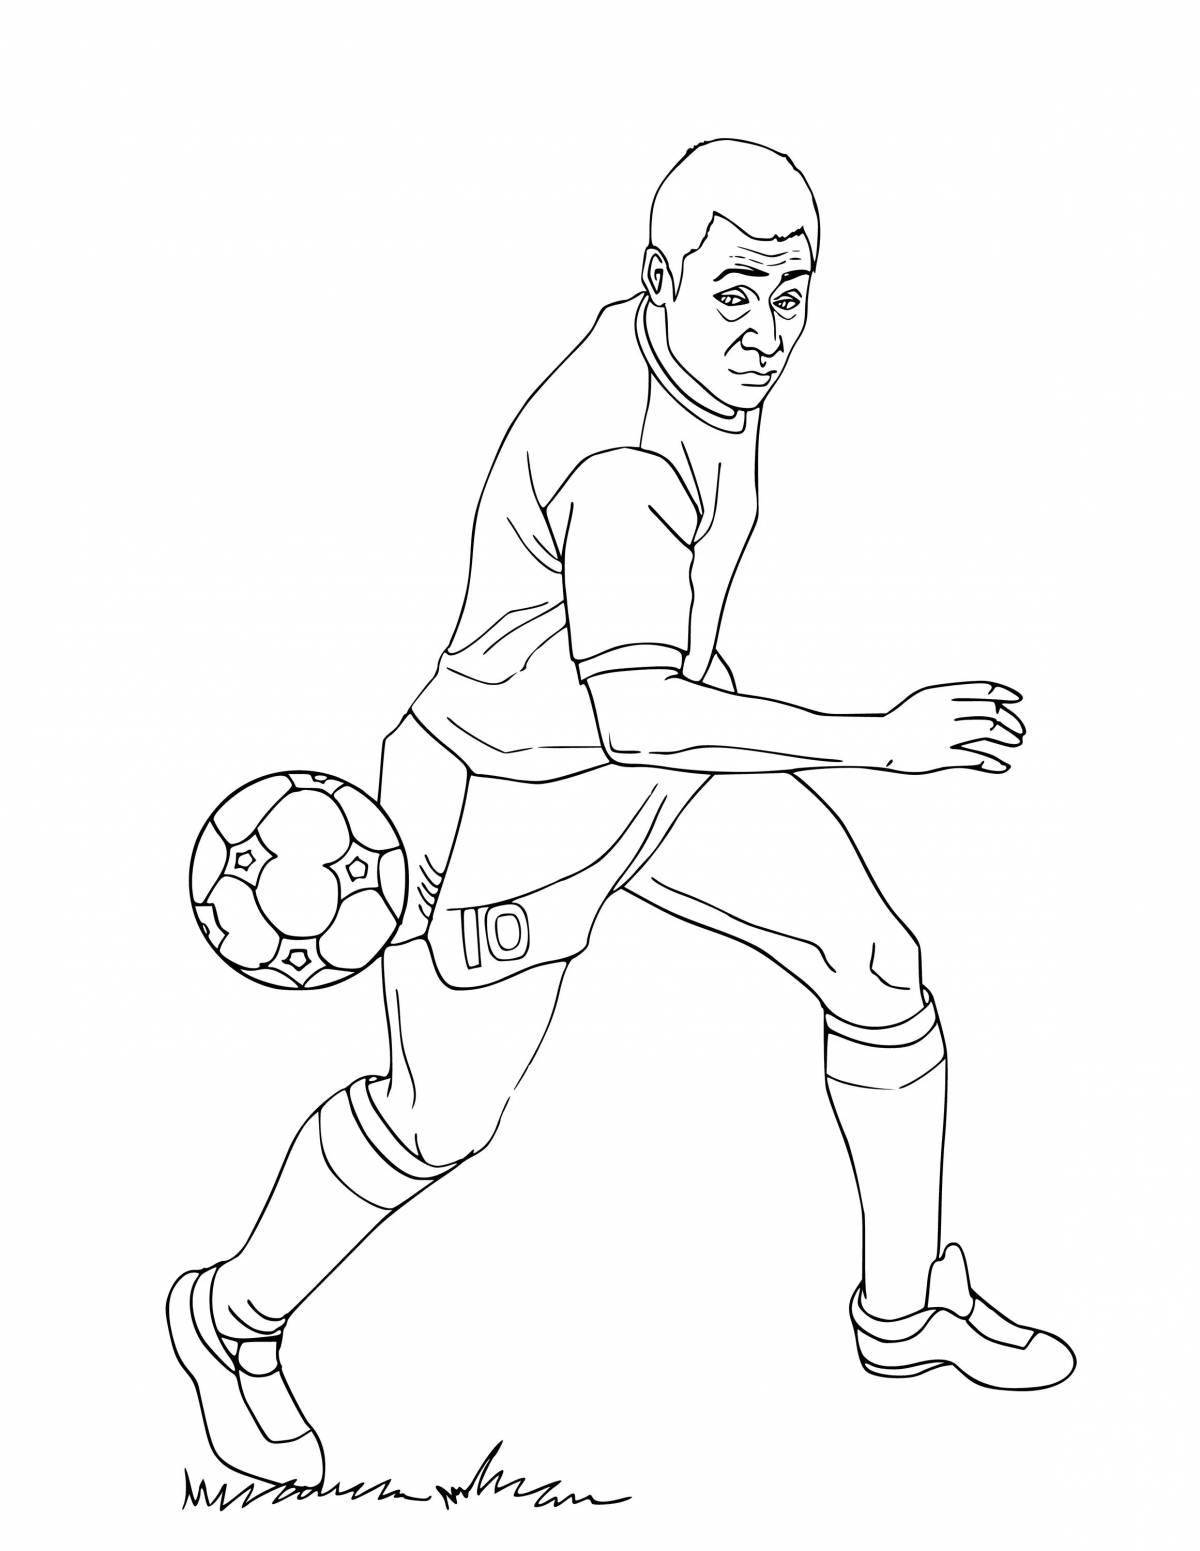 Coloring intensive football players